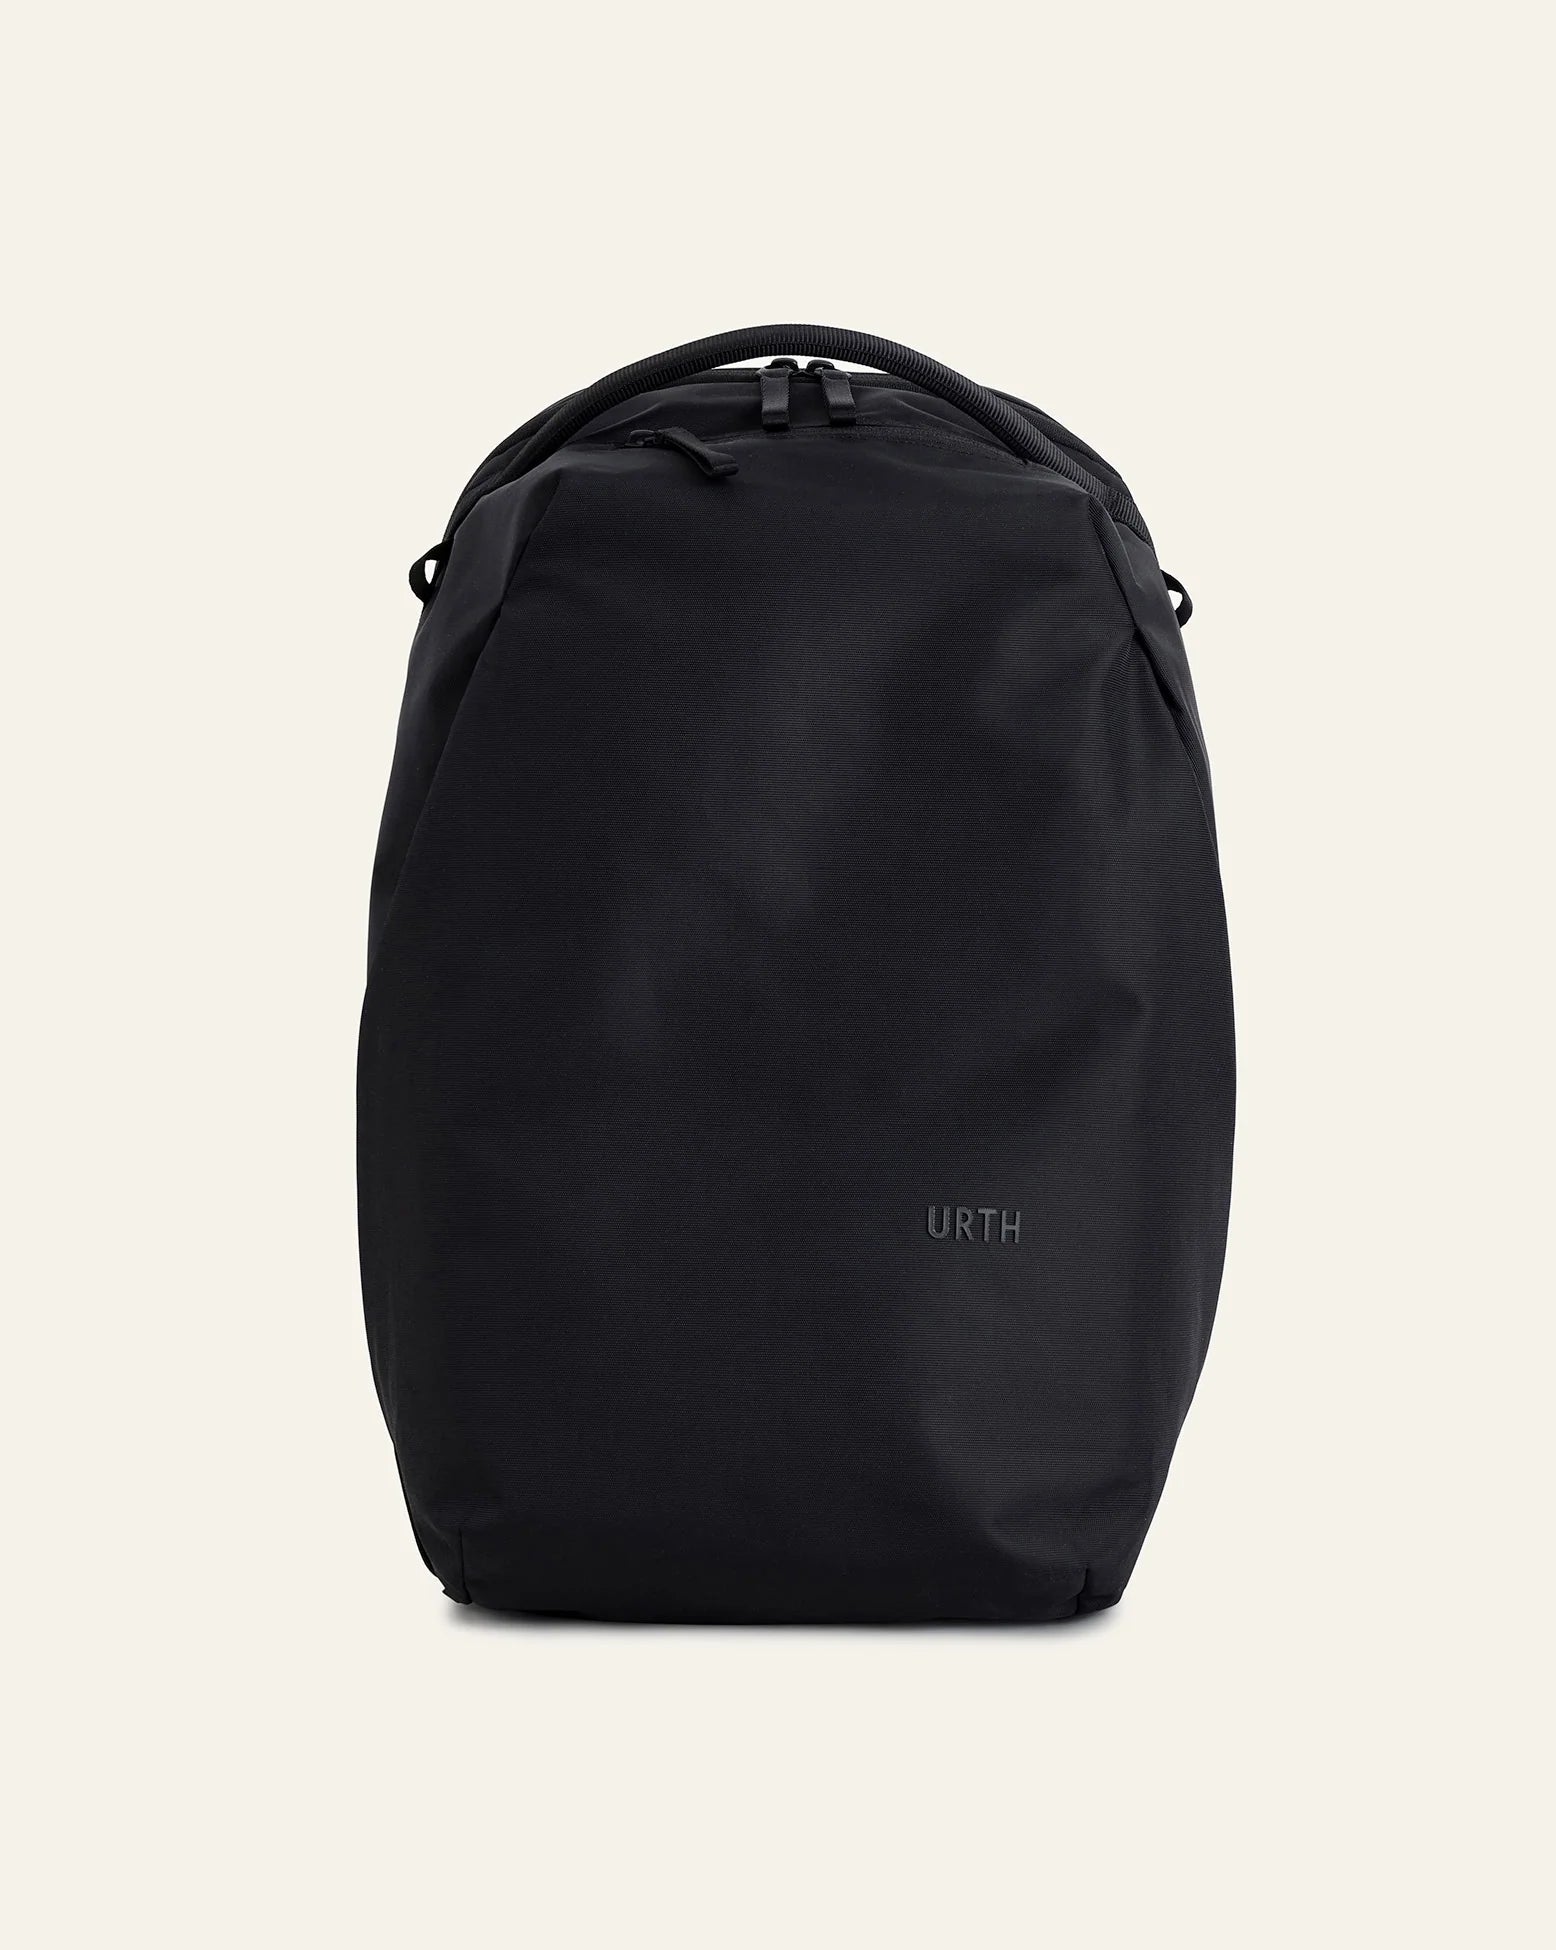 Best minimalist backpack for work and travel